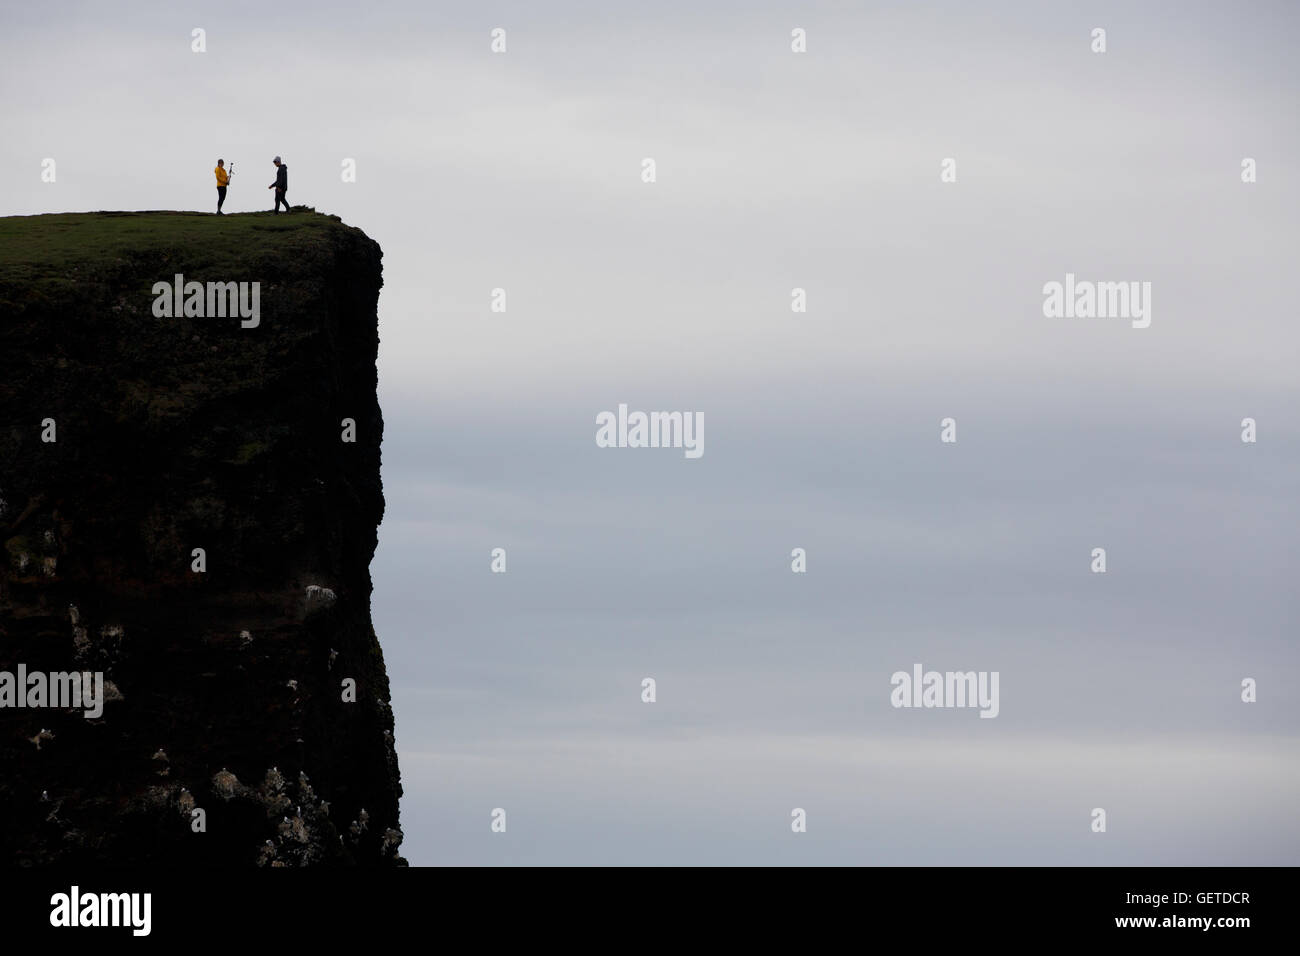 People silhouetted on a cliff, Hafnaberg, Iceland Stock Photo